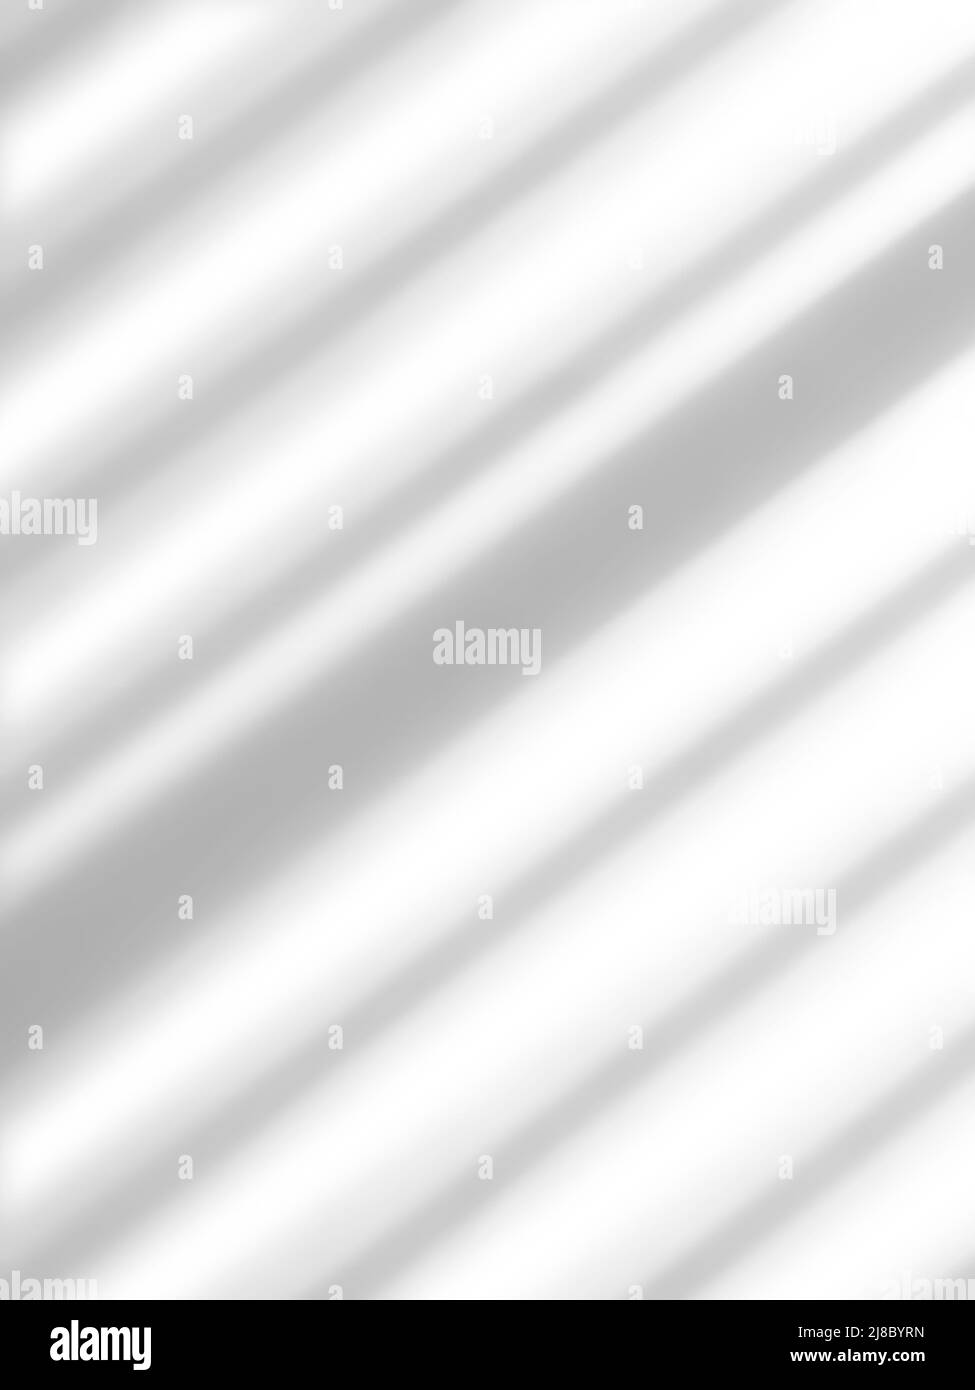 Abstract, simple and modern light gray wavy lines on white background with copy space - stock photo Stock Photo